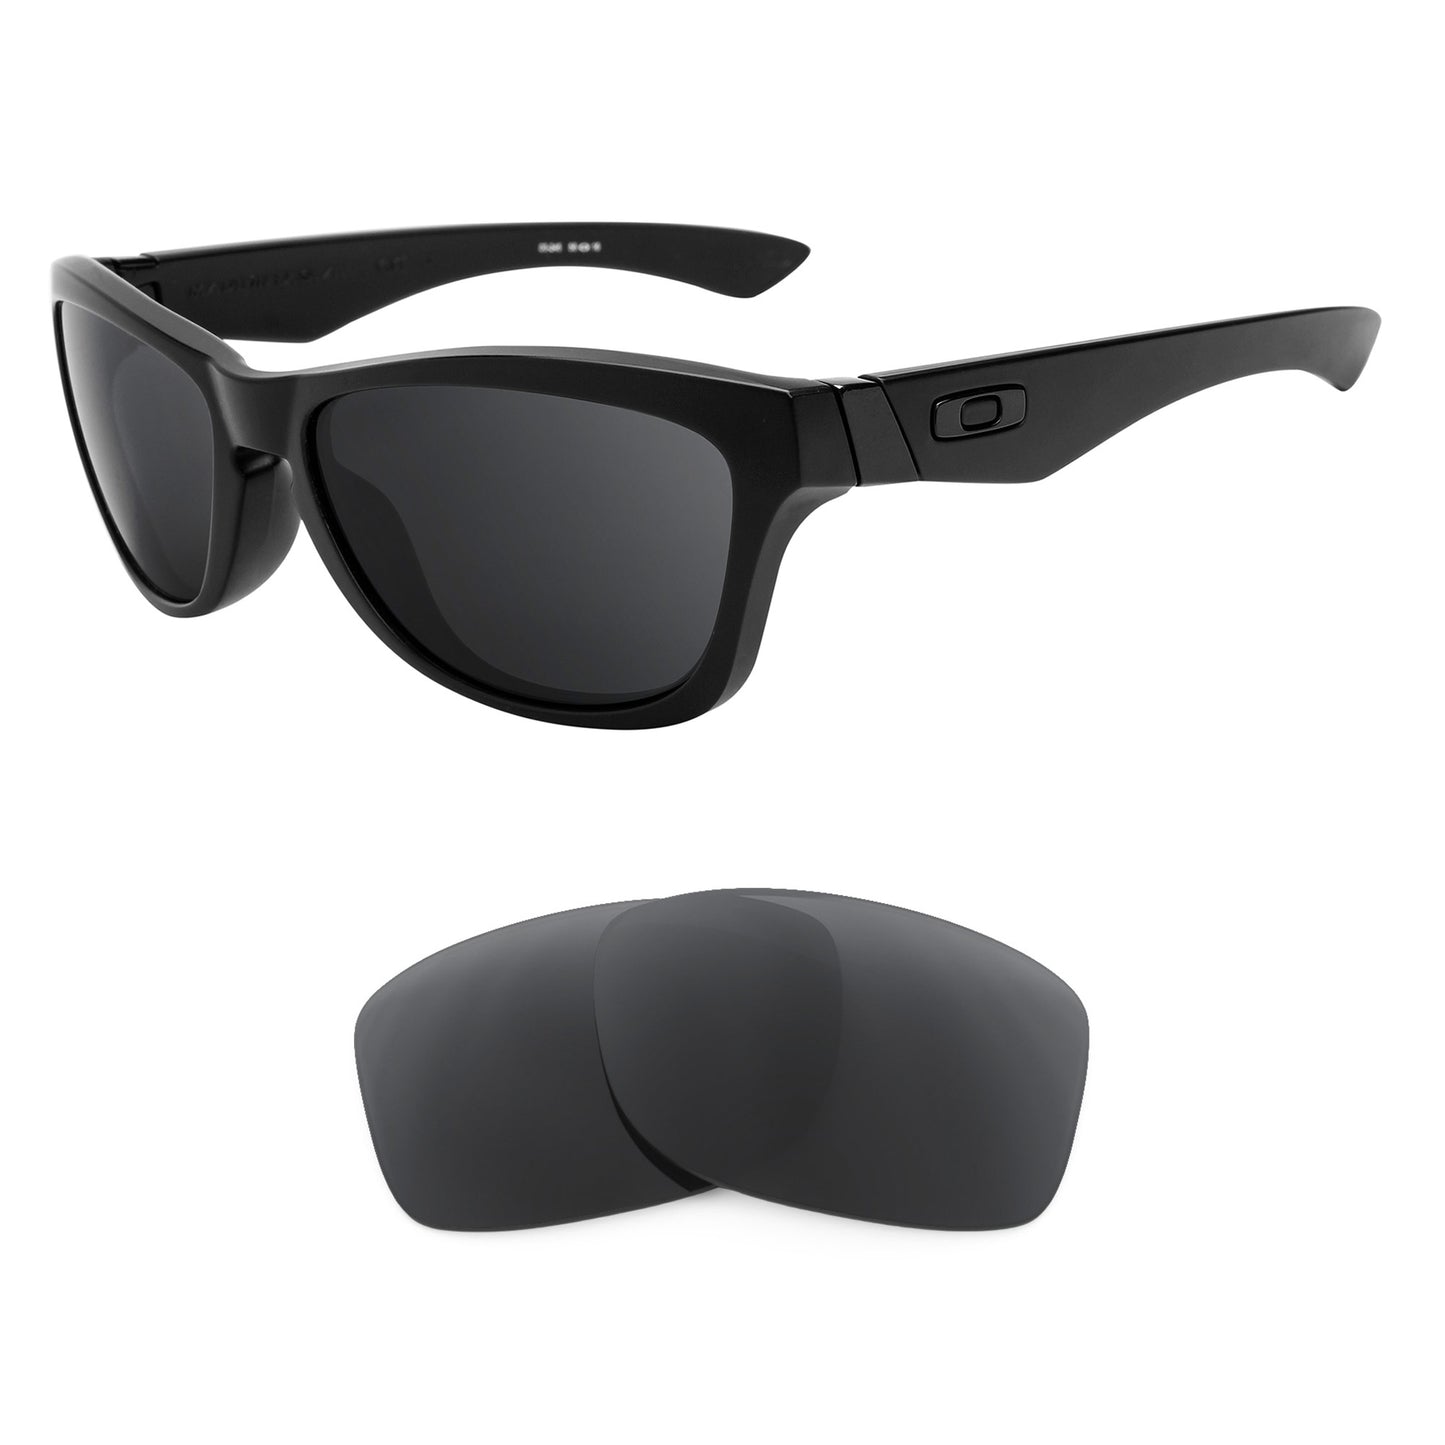 Oakley Jupiter sunglasses with replacement lenses